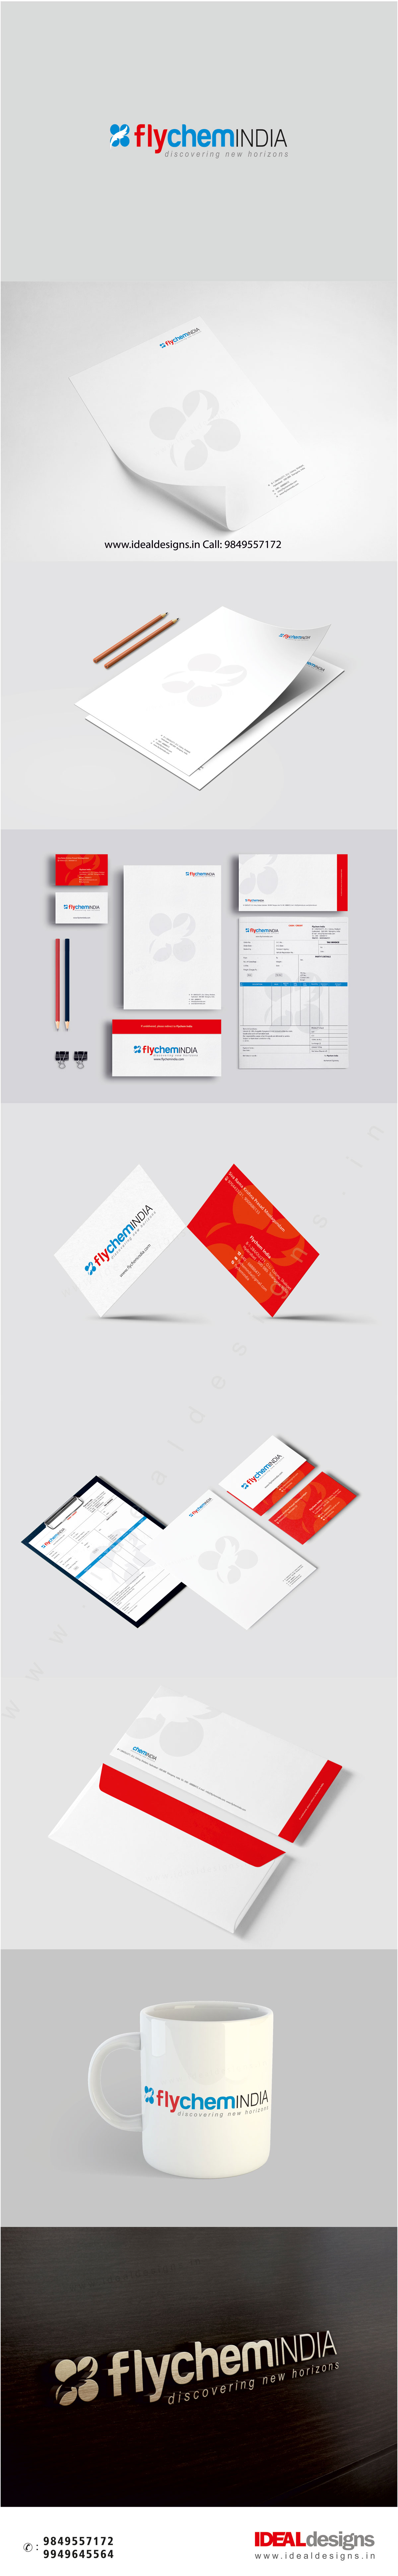 creative-Stationery-Design-Services-in-Hyderabad-professional-Stationery-Design-Services-in-Hyderabad.jpg